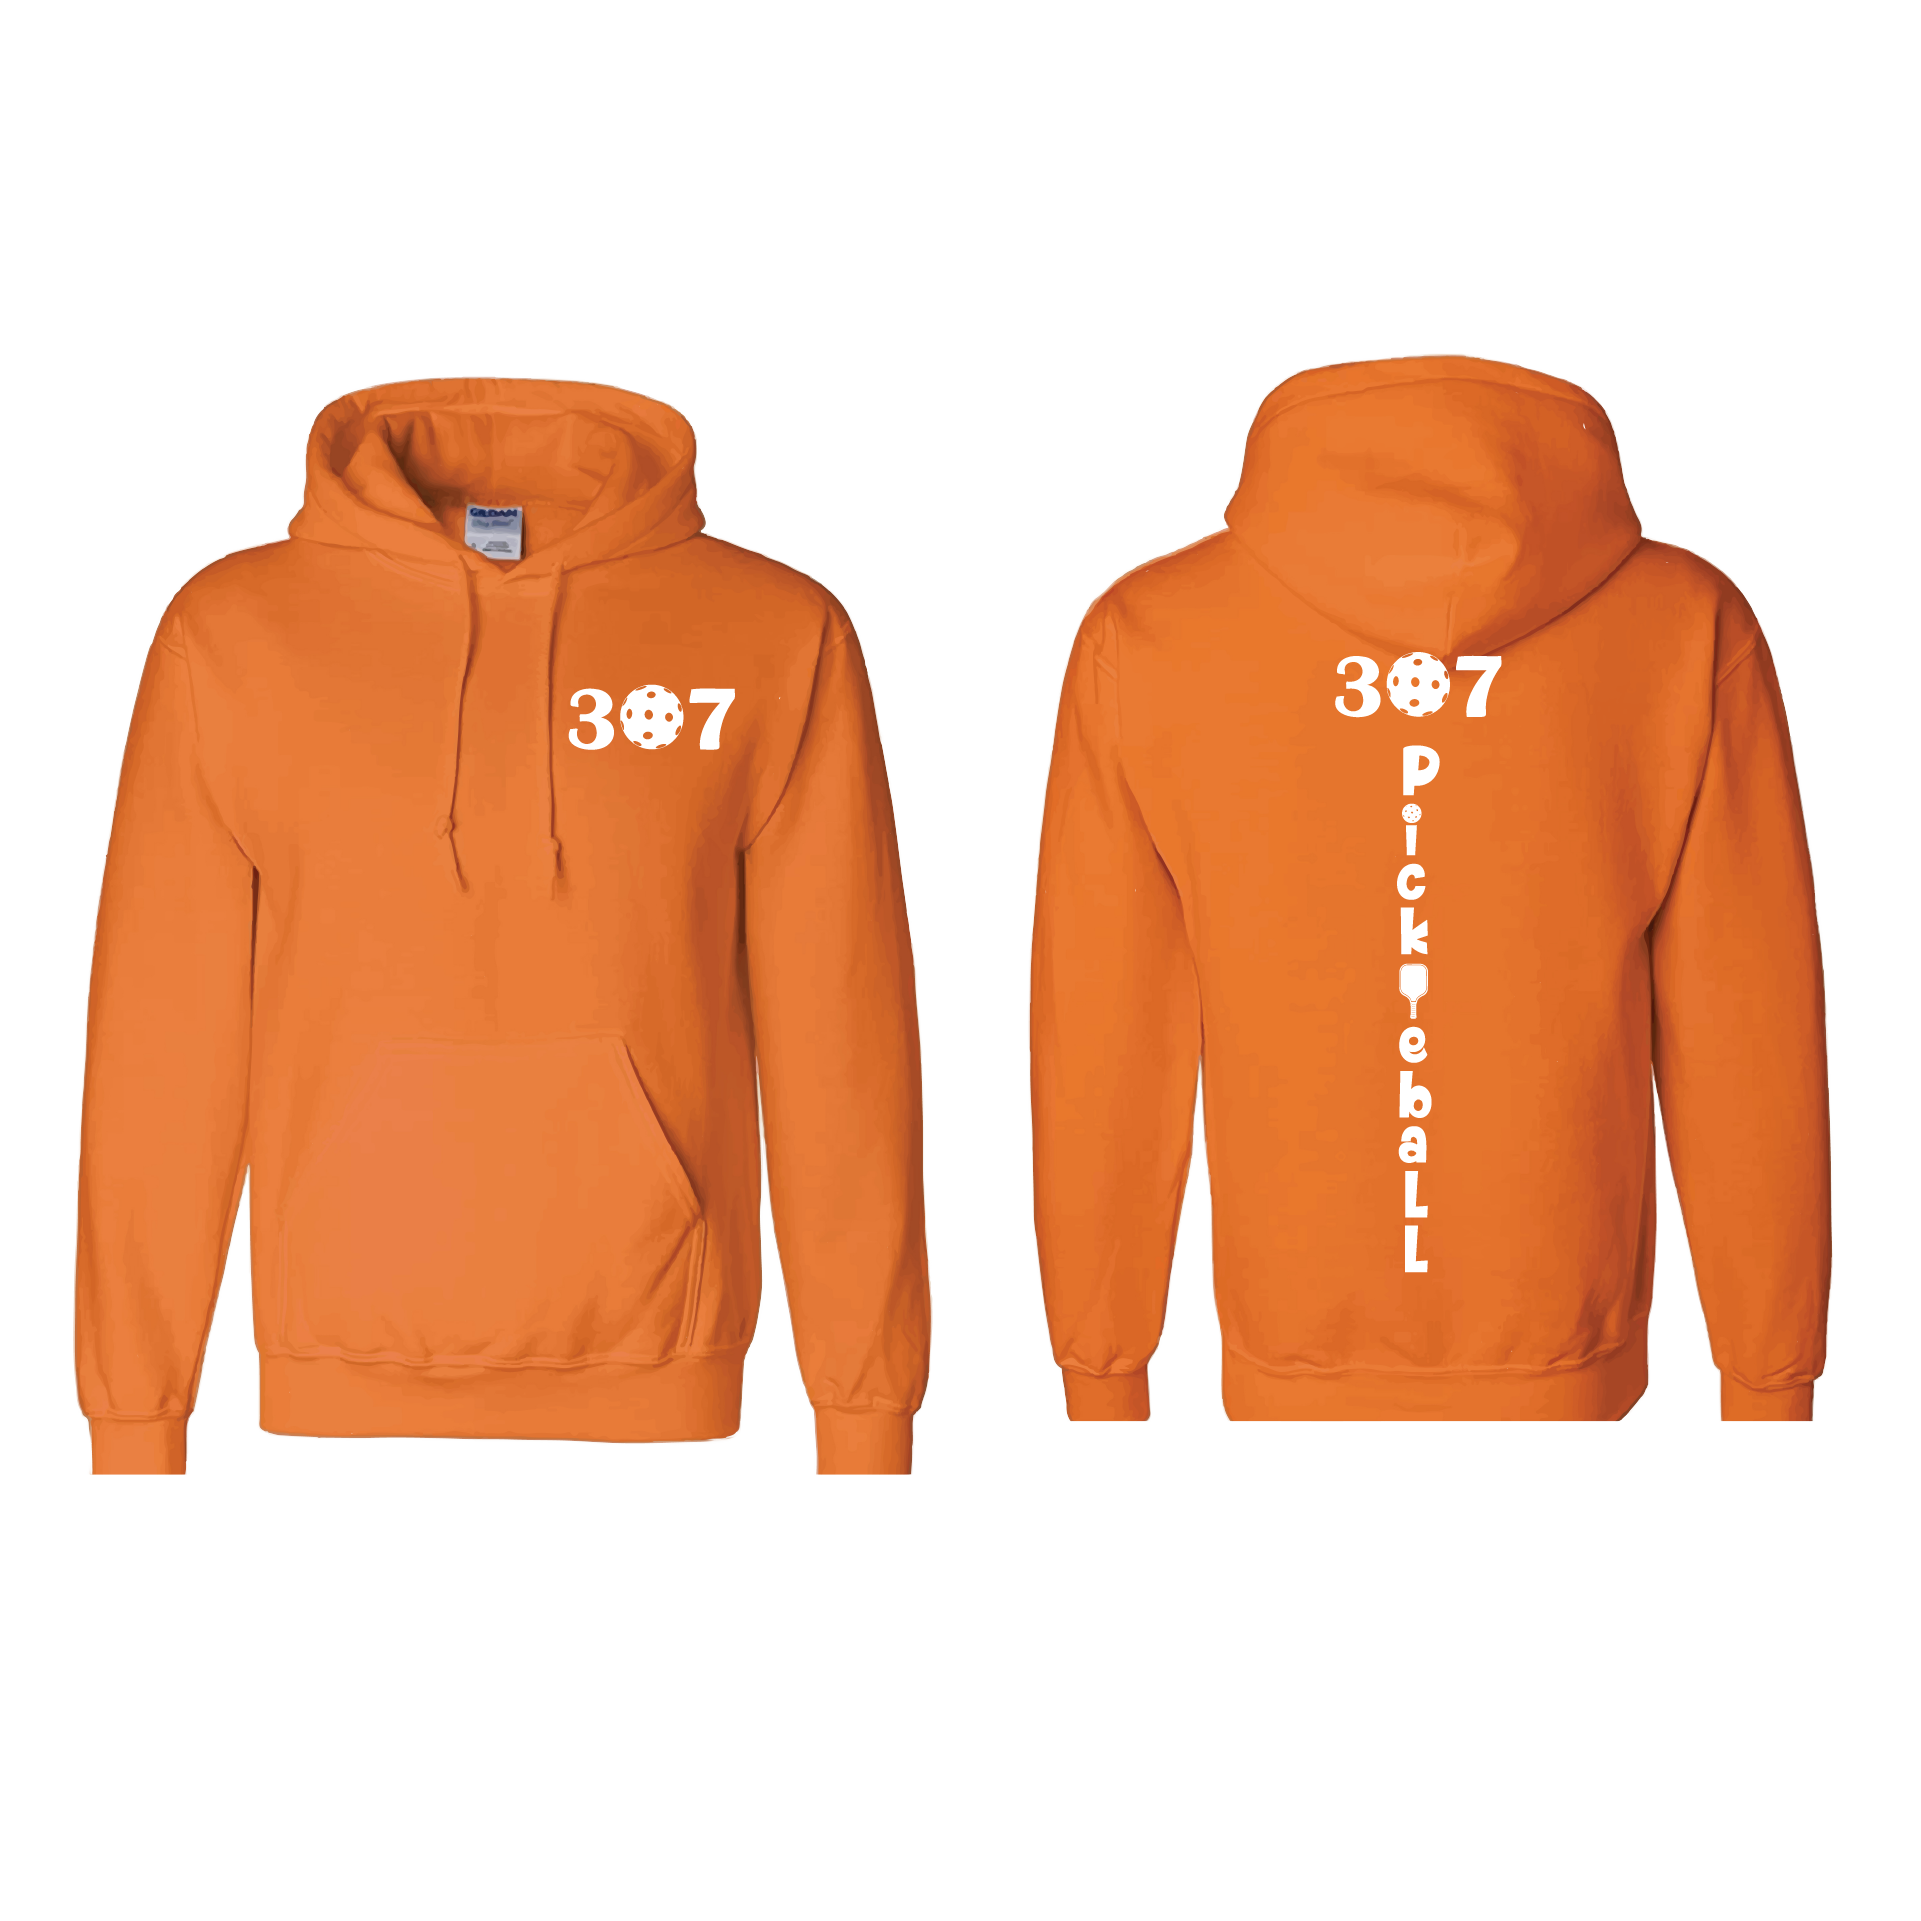 Design: 307 Wyoming Pickleball Club  Unisex Hooded Sweatshirt: Moisture-wicking, double-lined hood, front pouch pocket.  This unisex hooded sweatshirt is ultra comfortable and soft. Stay warm on the Pickleball courts while being that hit with this one of kind design.